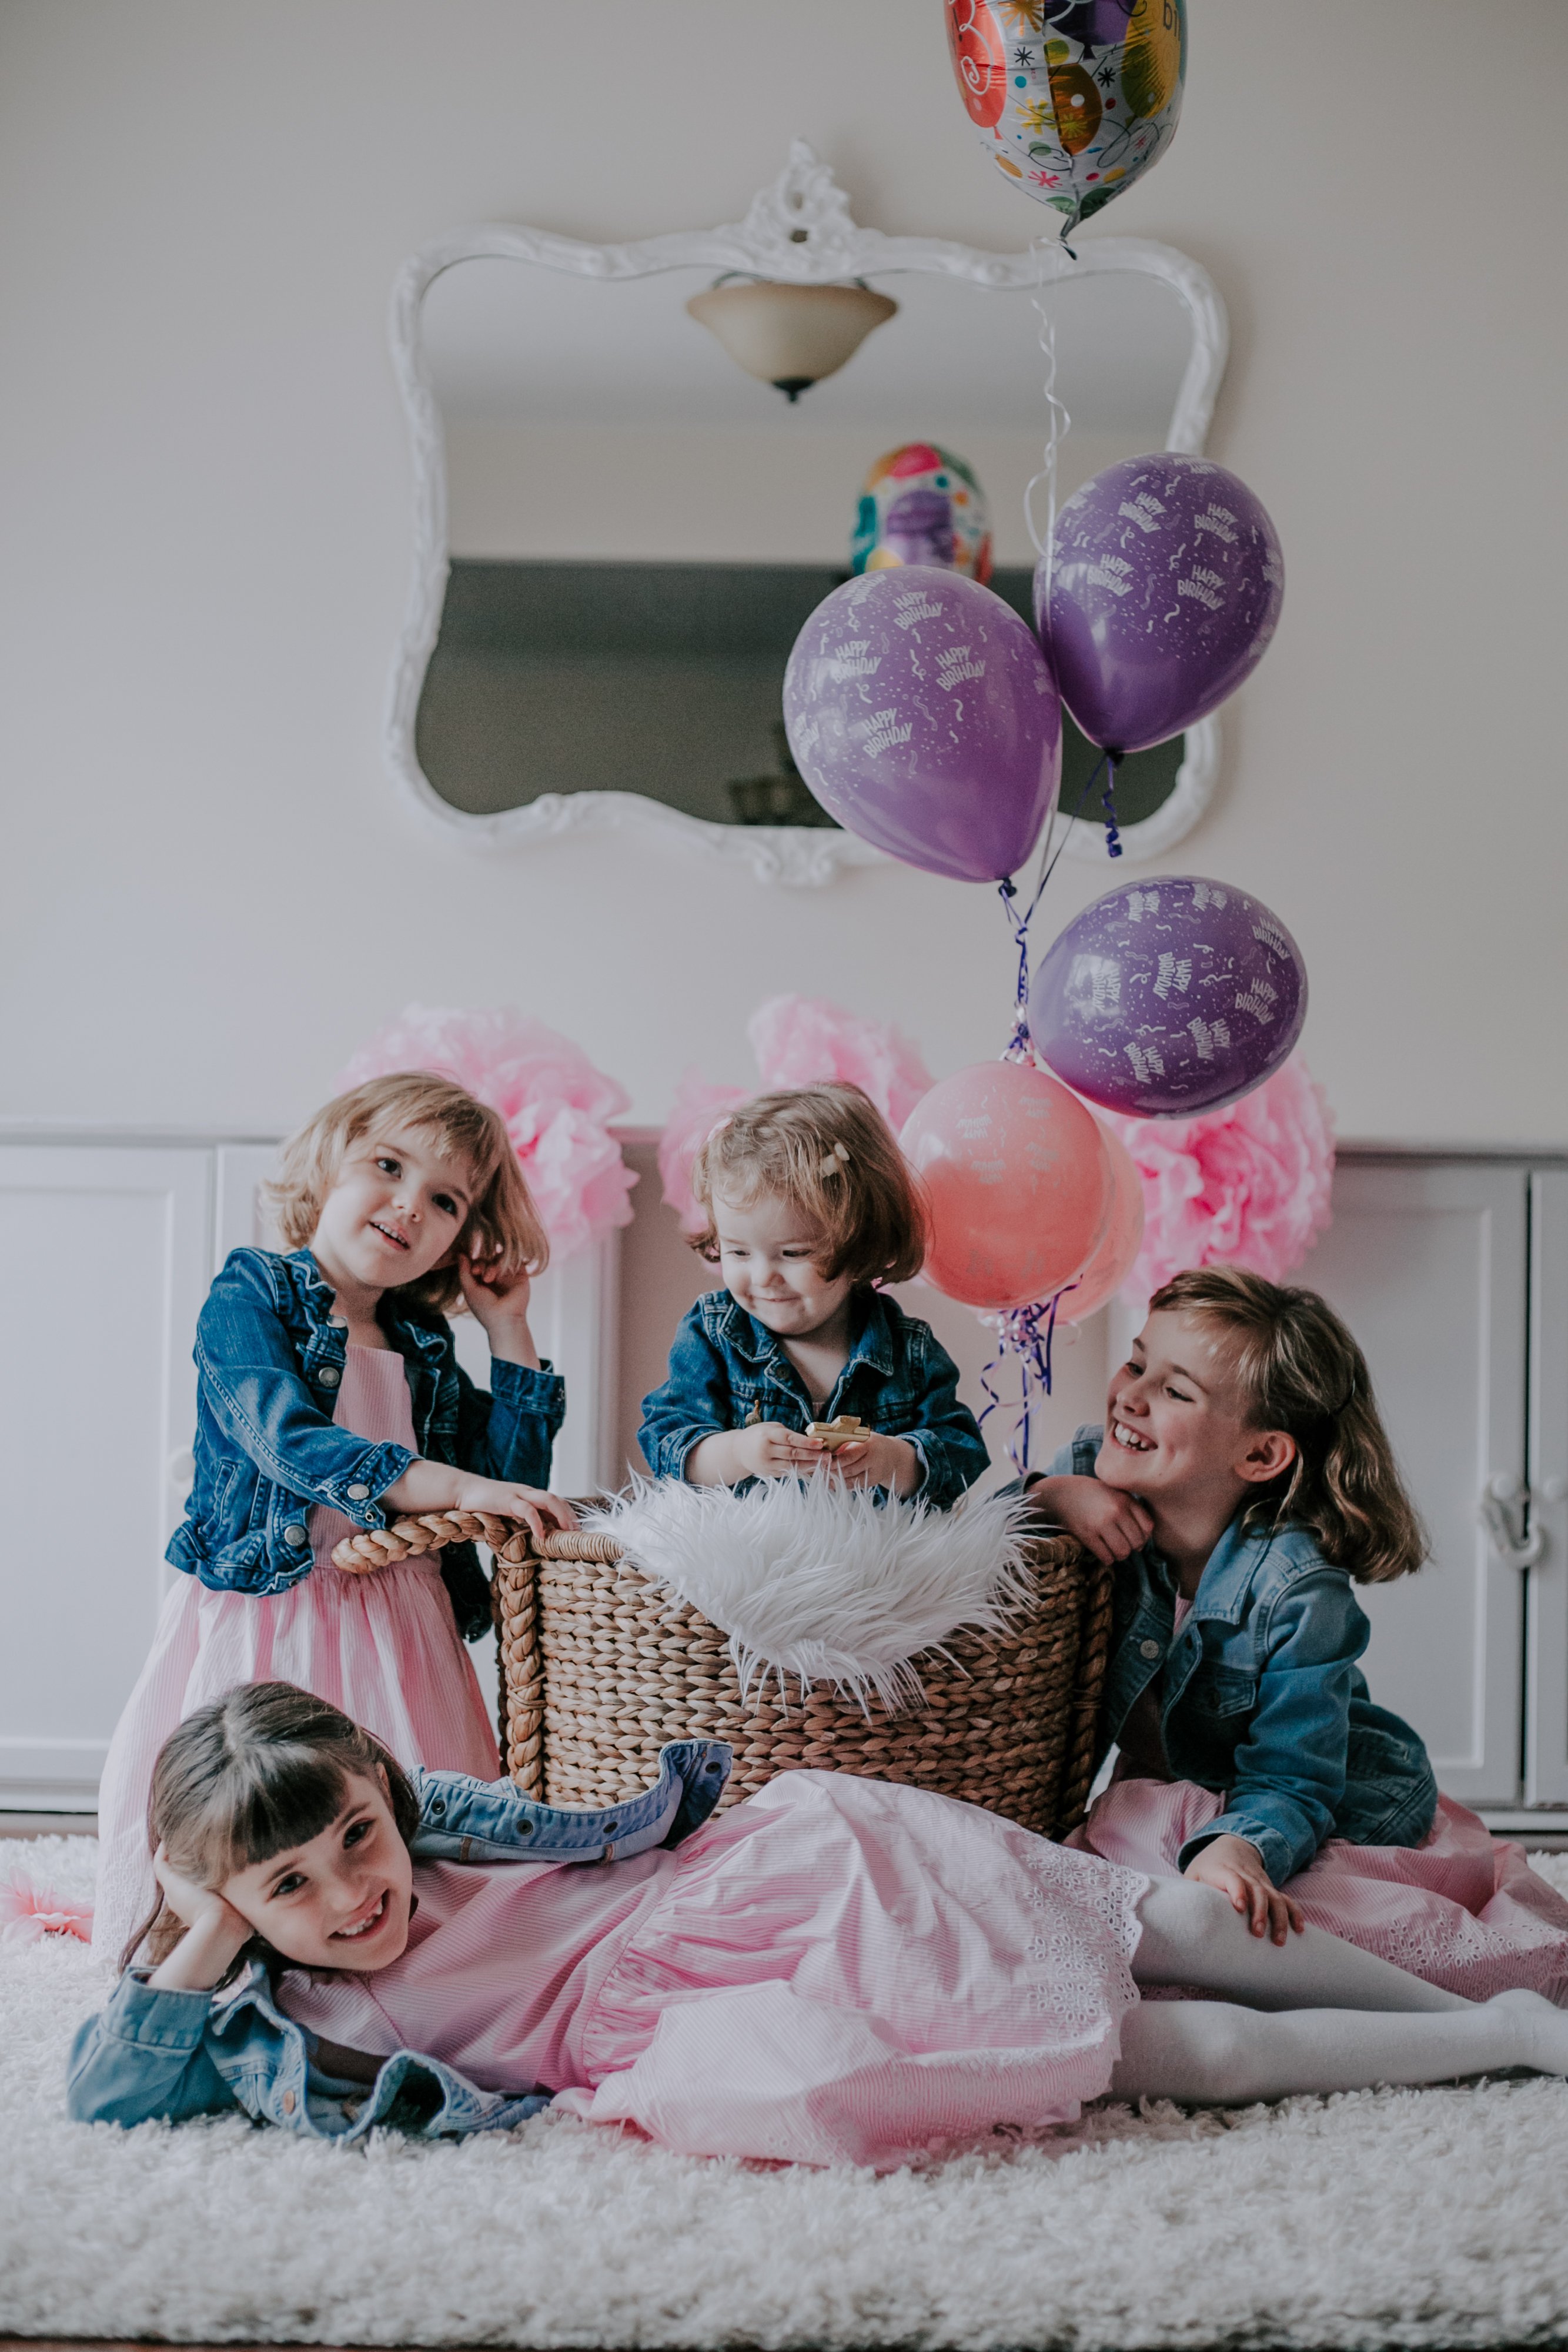 Josie and her three older sisters during her Cake Smash Session in Toronto. The birthday girl sits in a wicker basket with helium balloons attached looking like she'll be carried away Up style if her sisters stop leaning on the basket!